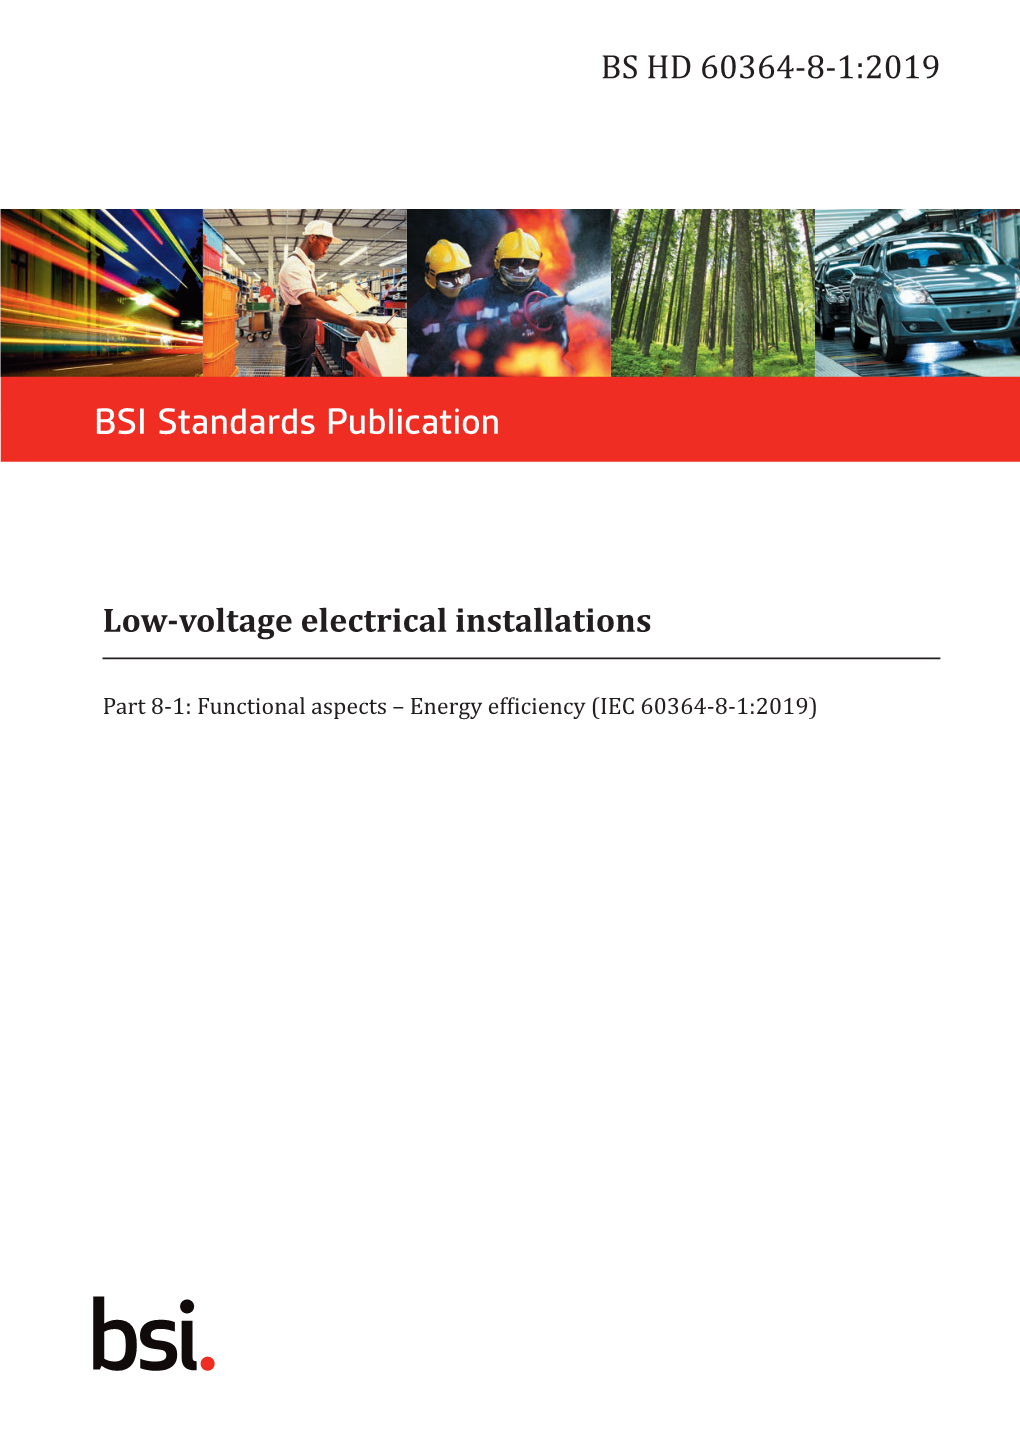 Low-Voltage Electrical Installations